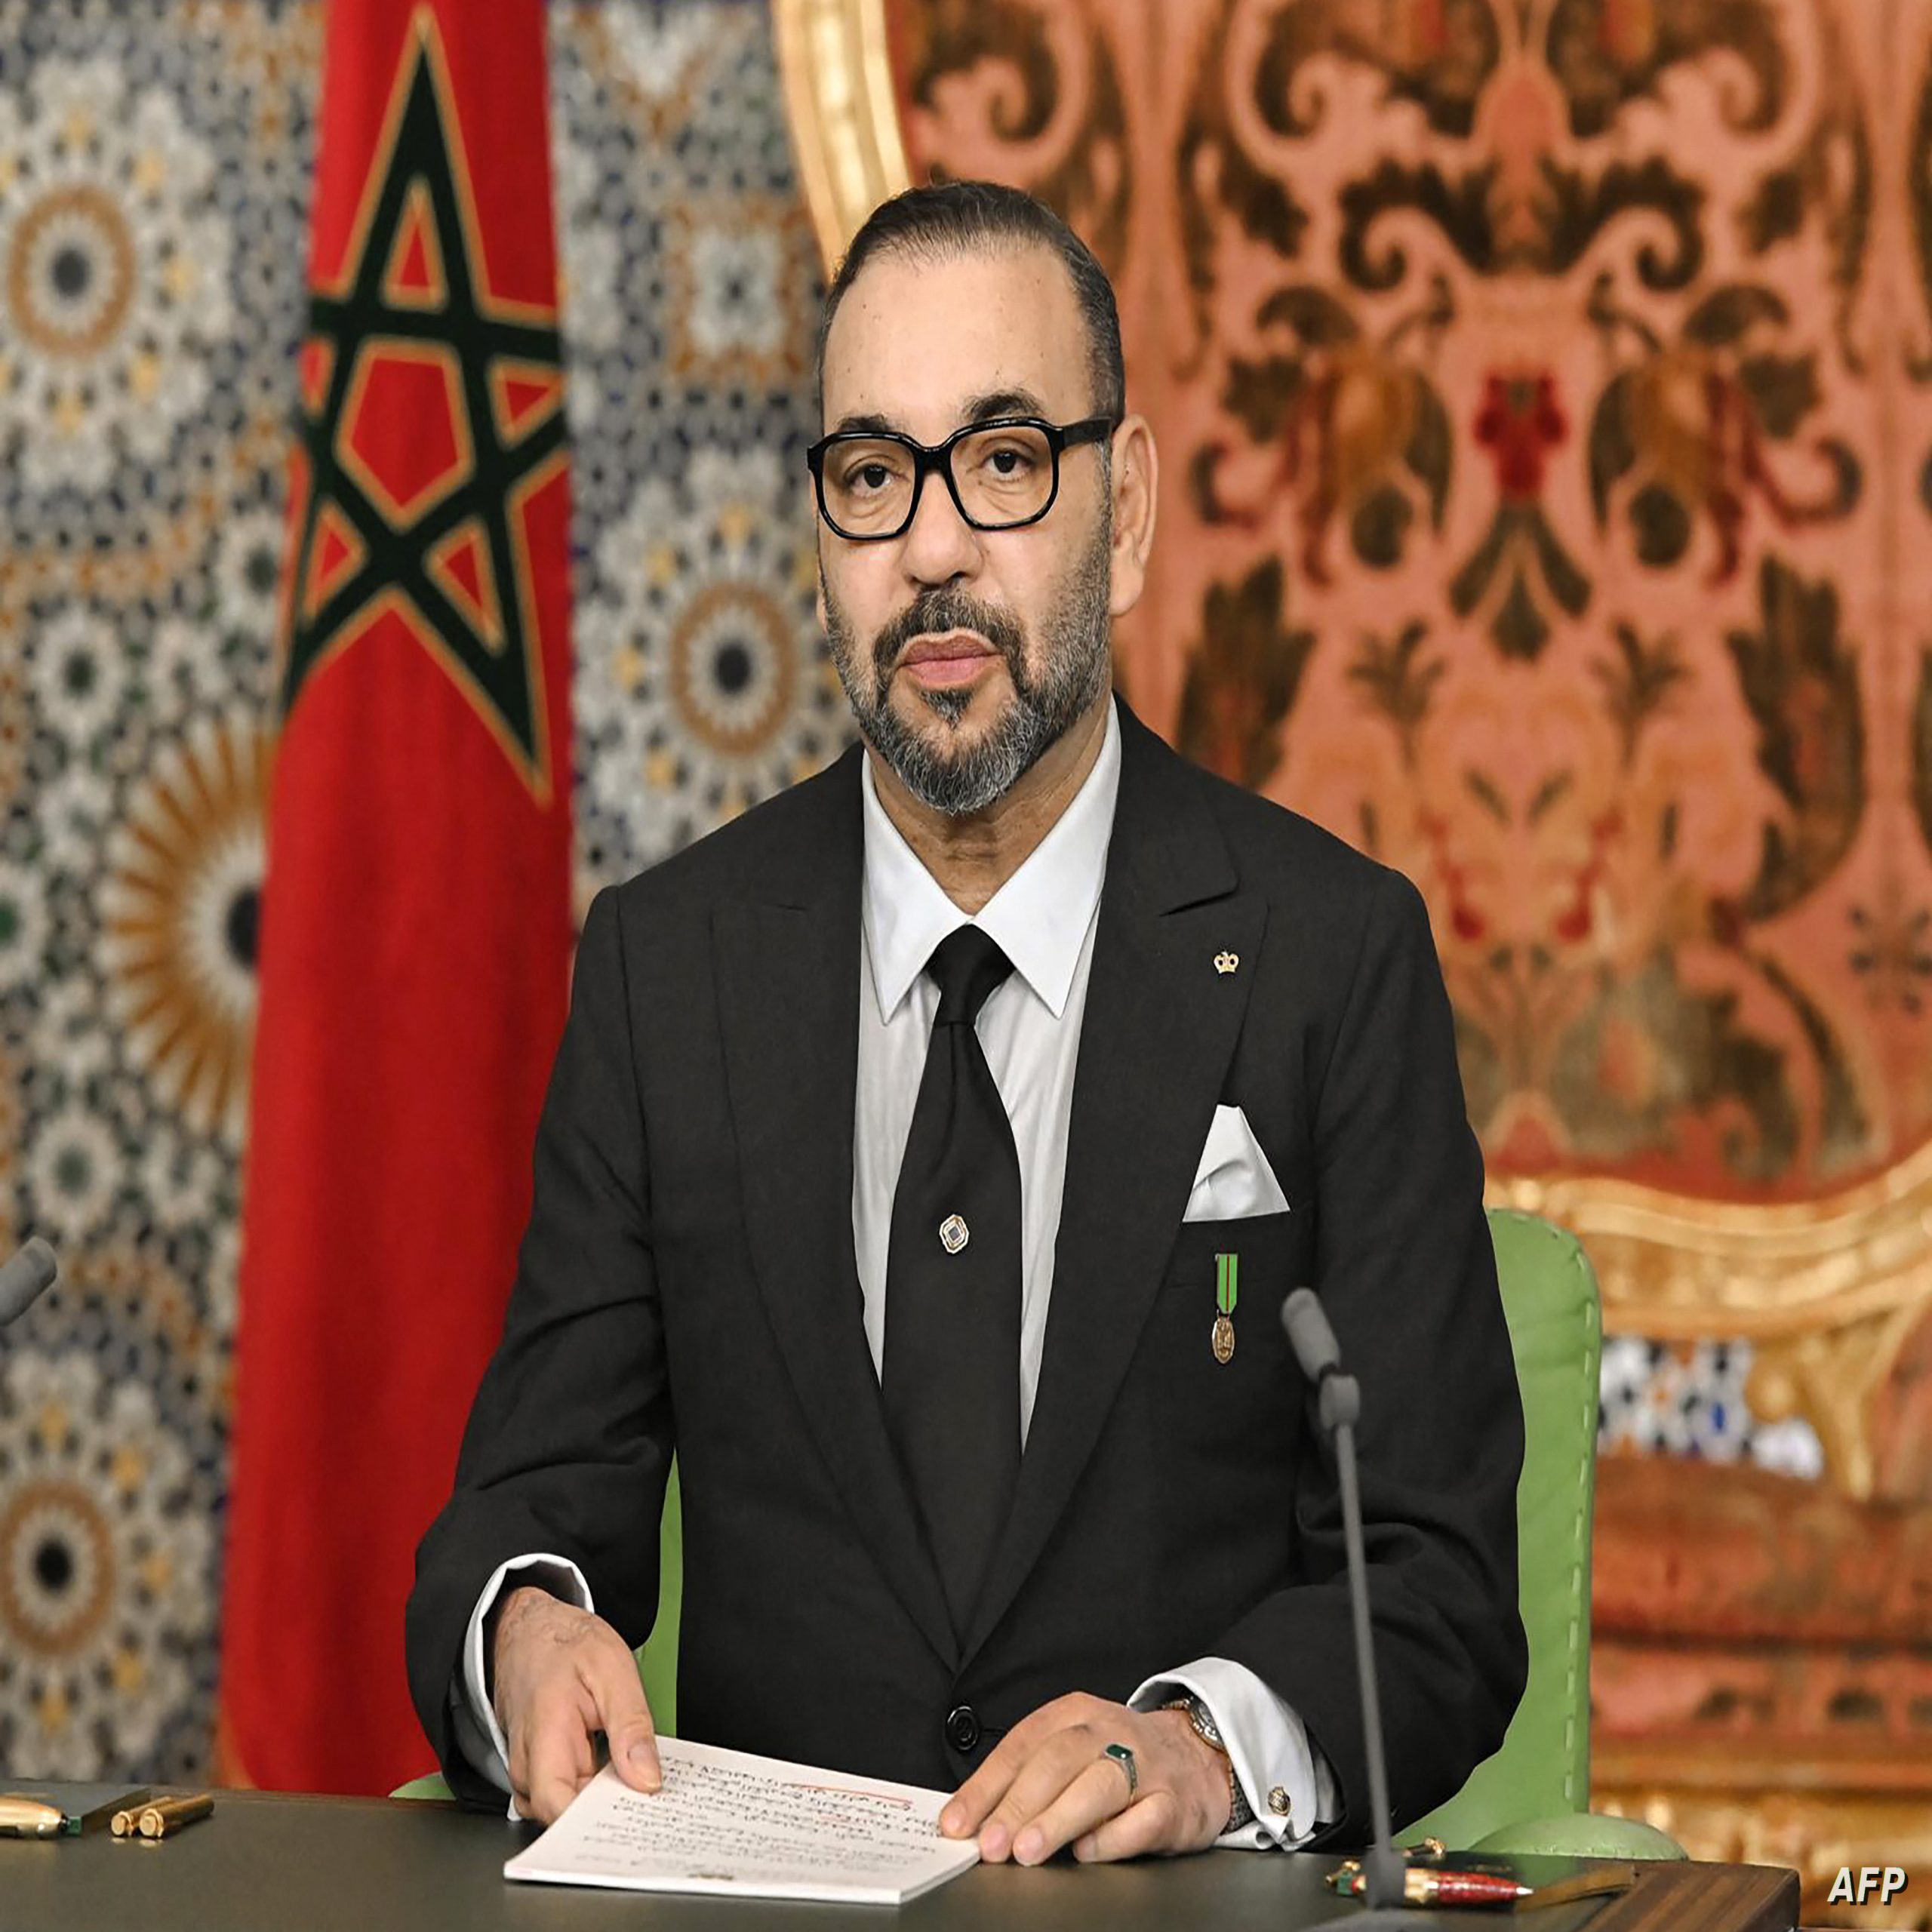 A handout picture released by the Moroccan Royal Palace on November 6, 2021, shows King Mohammed VI delivering a speech to the nation on the occasion of the 46th anniversary of the Green March, in the capital Rabat. - Morocco's King Mohamed VI said that Western Sahara is "not negotiable", as tensions flared with Algeria over the disputed territory. In 1975, the king's father, Hassan II, sent 350,000 civilian volunteers on the iconic march into the Western Sahara. (Photo by Moroccan Royal Palace / AFP) / RESTRICTED TO EDITORIAL USE - MANDATORY CREDIT "AFP PHOTO / SOURCE / MOROCCAN ROYAL PALACE- NO MARKETING NO ADVERTISING CAMPAIGNS - DISTRIBUTED AS A SERVICE TO CLIENTS